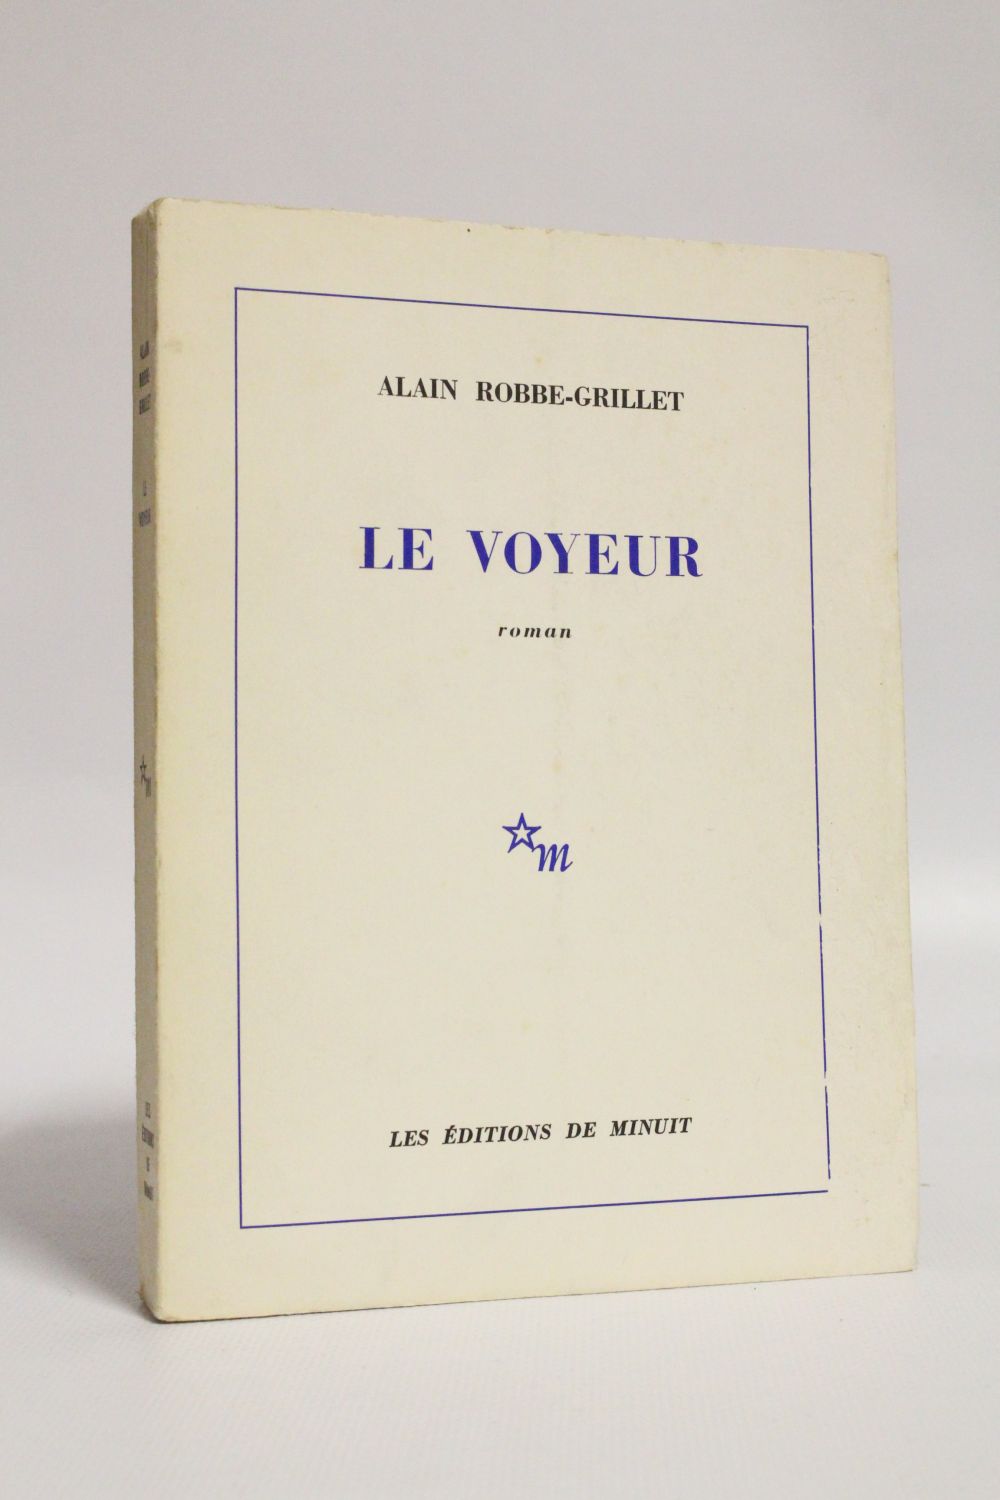 ROBBE-GRILLET Le voyeur - Signed book, First edition pic